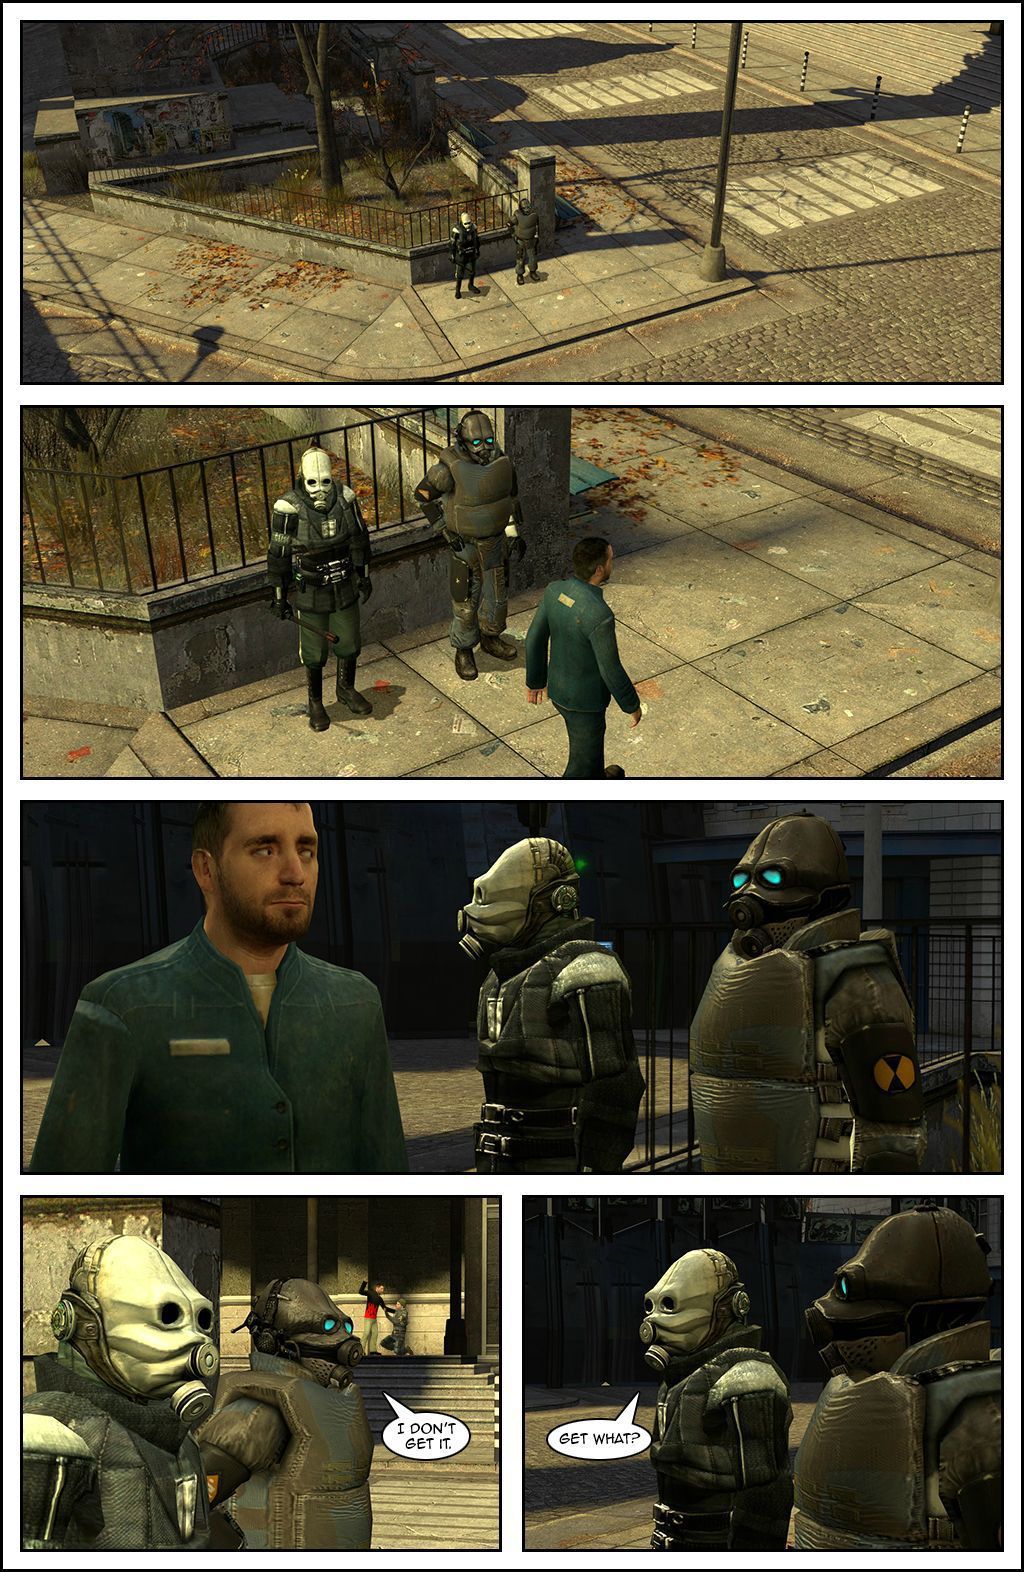 The scene shifts towards a Civil Protection officer and a Combine Overwatch soldier nearby, the protagonists of the series Combine Exchange Program. The events of Combine Exchange Program episode 2 start playing: the soldier watches as a citizen with a worried look walks past them. The soldier tells his partner he doesn't get it, to which the metro cop asks, get what. Behind them, in the distance, Jeff can be seen beating up Jerry.